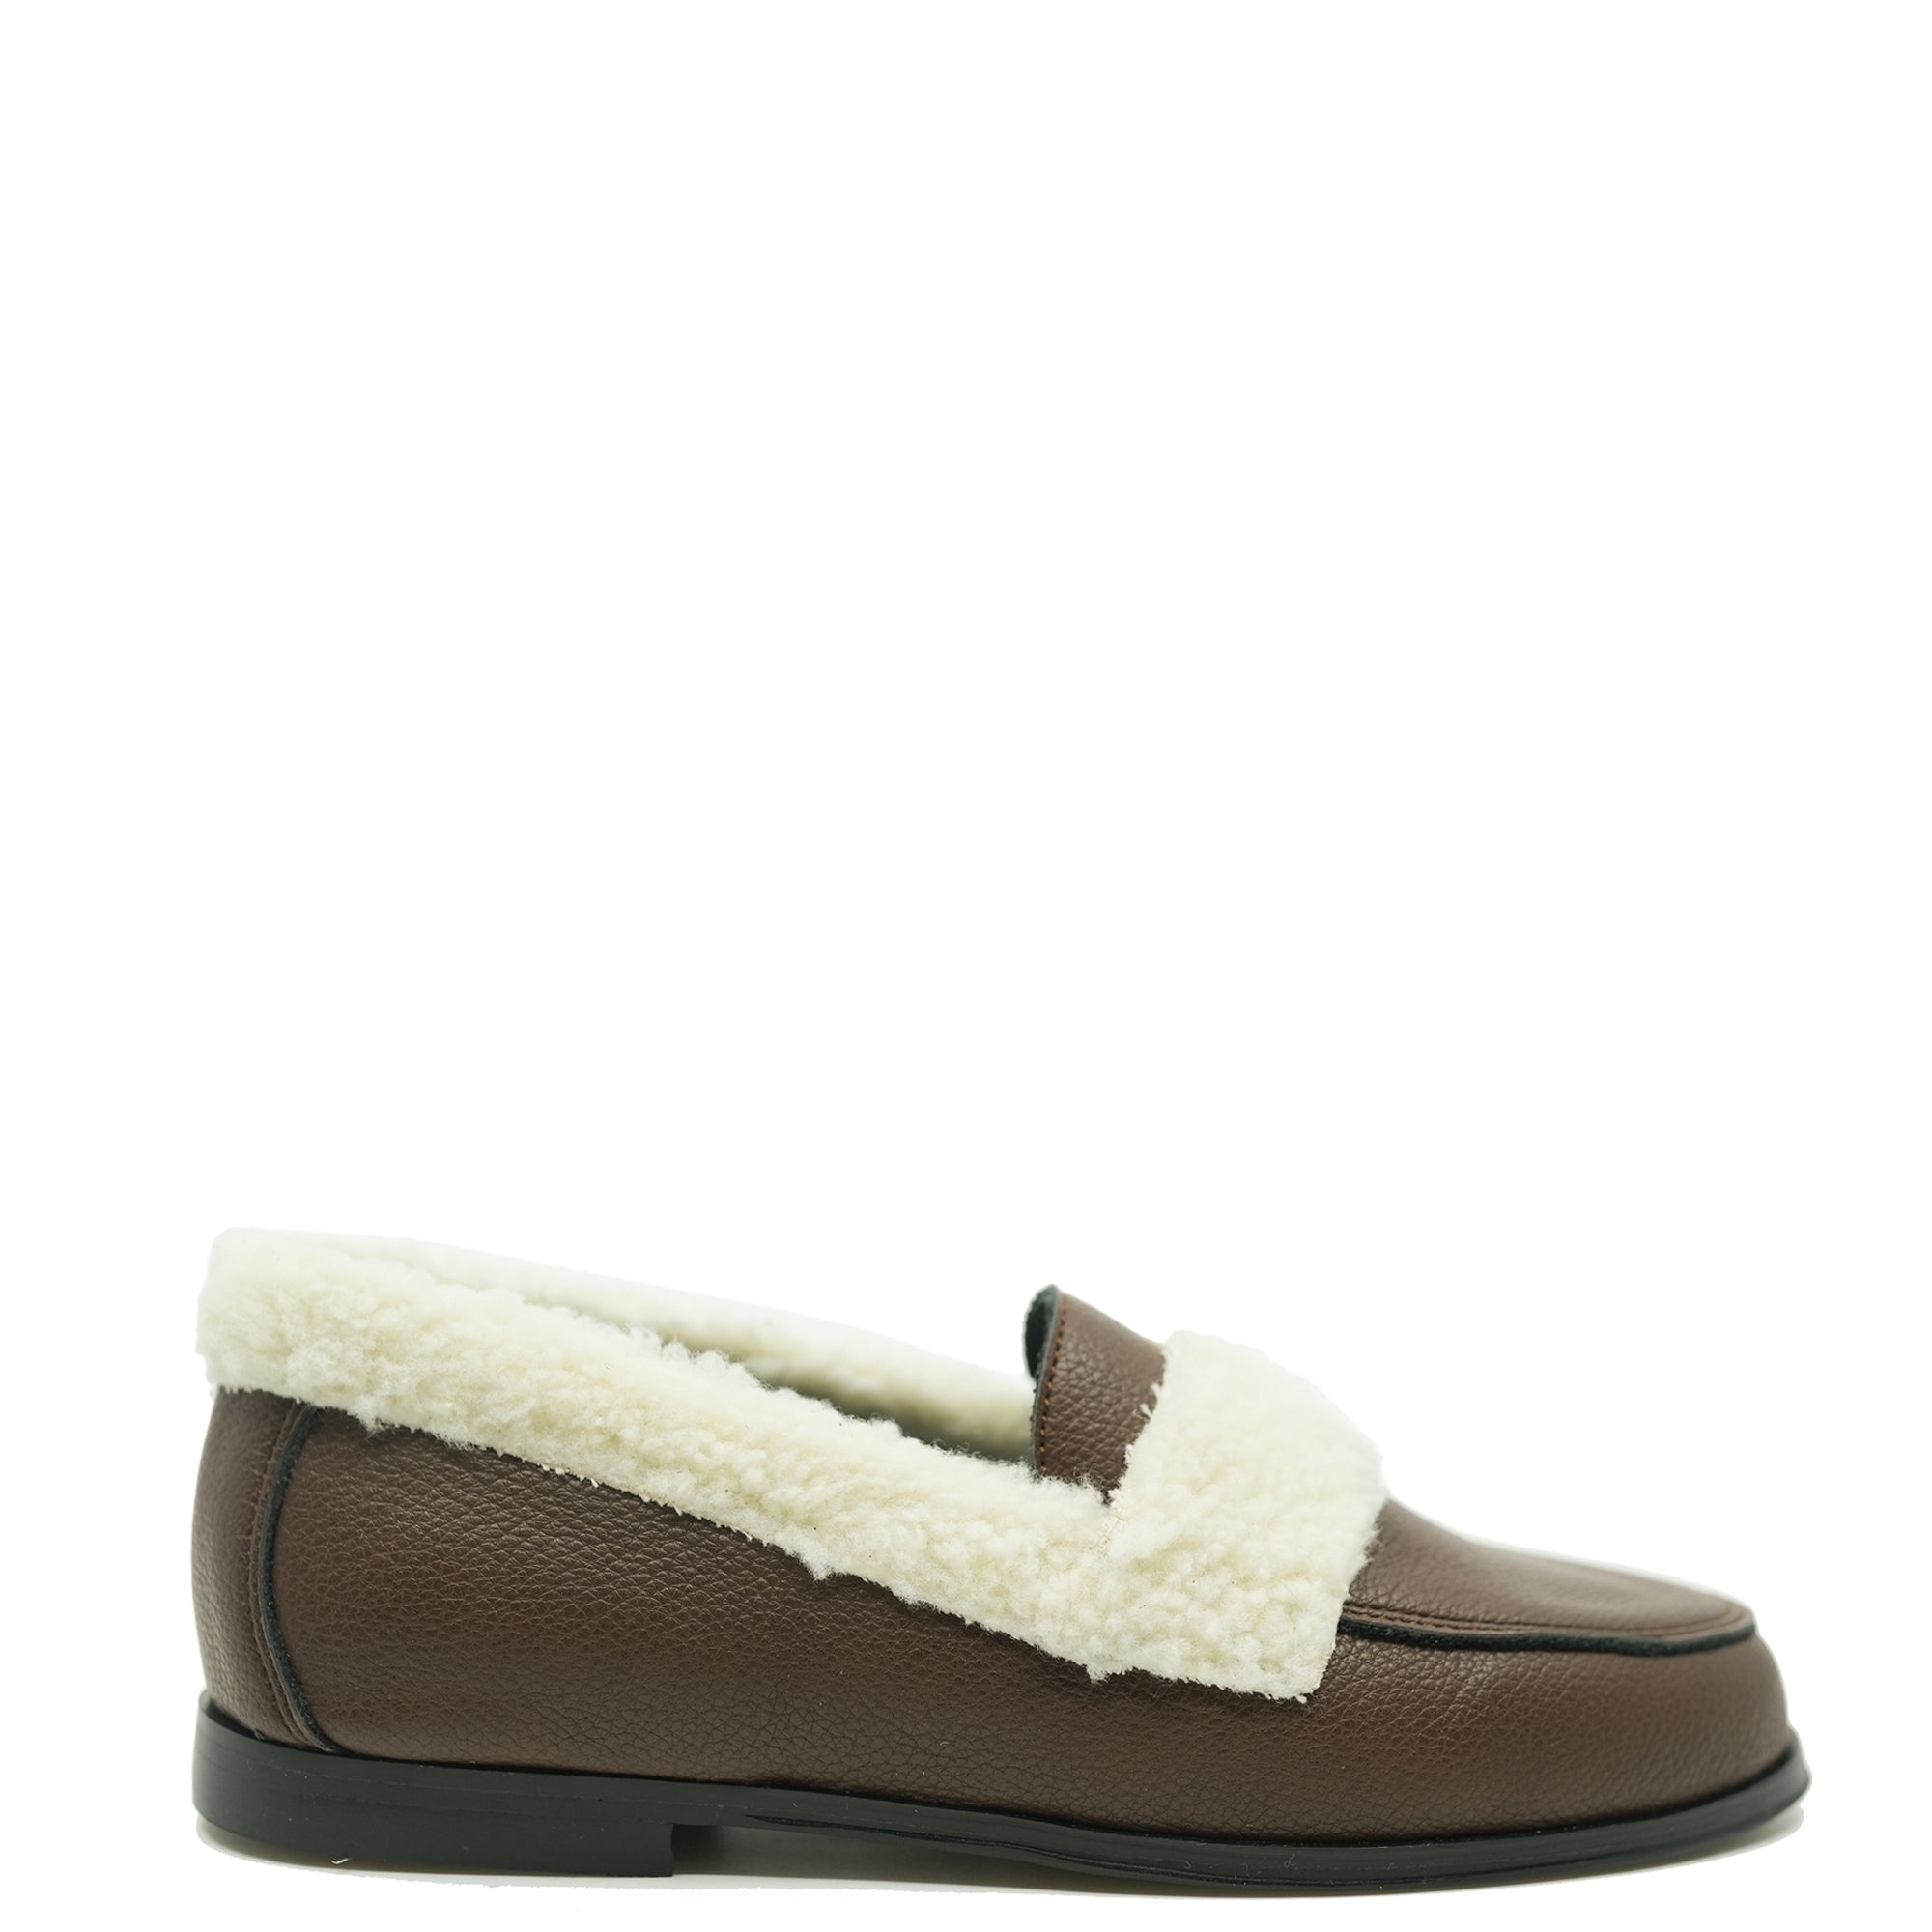 Blublonc Brown and Ivory Shearling Loafer-Tassel Children Shoes